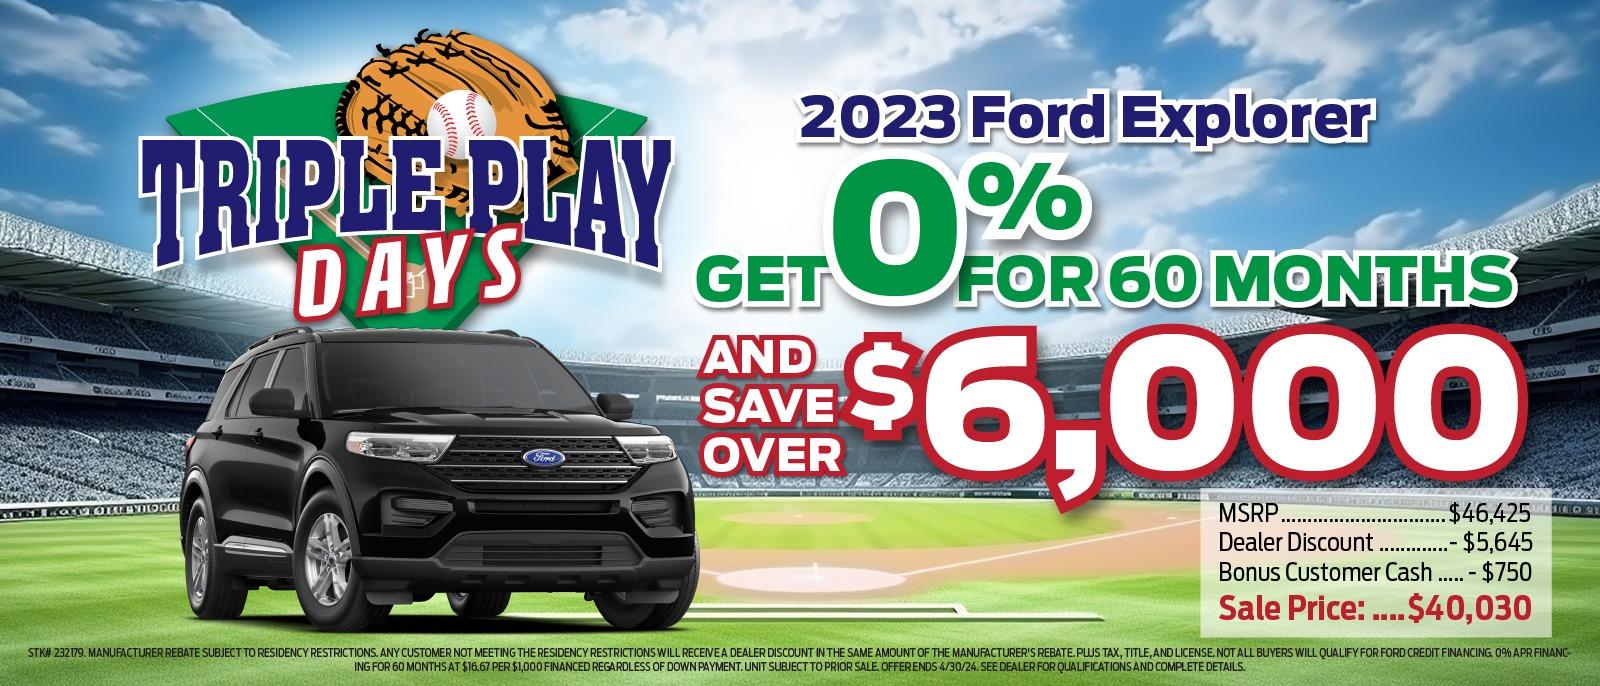 TRIPLE PLAY DAYS 2023 Ford Explorer % GET FOR 60 MONTHS AND SAVE OVER $6,000 MSRP Dealer Discount $46,425 - $5,645 Bonus Customer Cash..... - $750 Sale Price : ....$40,030 STK# 232179. MANUFACTURER REBATE SUBJECT TO RESIDENCY RESTRICTIONS. ANY CUSTOMER NOT MEETING THE RESIDENCY RESTRICTIONS WILL RECEIVE A DEALER DISCOUNT IN THE SAME AMOUNT OF THE MANUFACTURER'S REBATE.PLUS TAX, TITLE, AND LICENSE. NOT ALL BUYERS WILL QUALIFY FOR FORD CREDIT FINANCING 0% APR FINANC- ING FOR 60 MONTHS AT $16.67 PER $1,000 FINANCED REGARDLESS OF DOWN PAYMENT. UNIT SUBJECT TO PRIOR SALE, OFFERENDS 4/30/24. SEE DEALER FOR QUALIFICATIONS AND COMPLETE DETAILS.